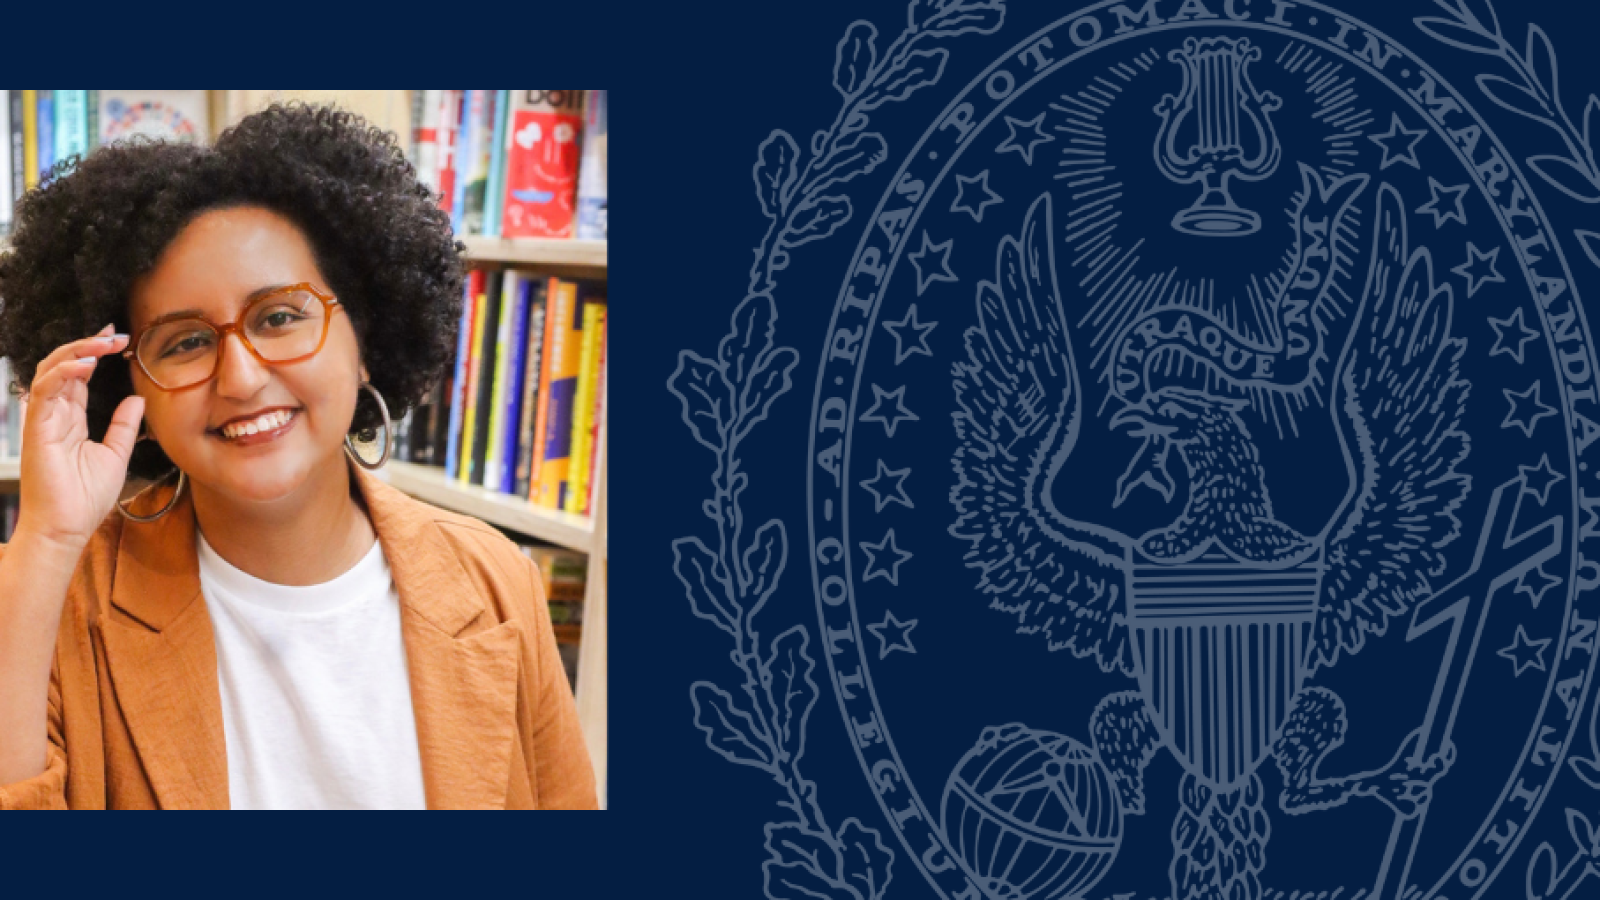 Bezawit Yohannes headshot overlaid on graphic with blue background and Georgetown University seal